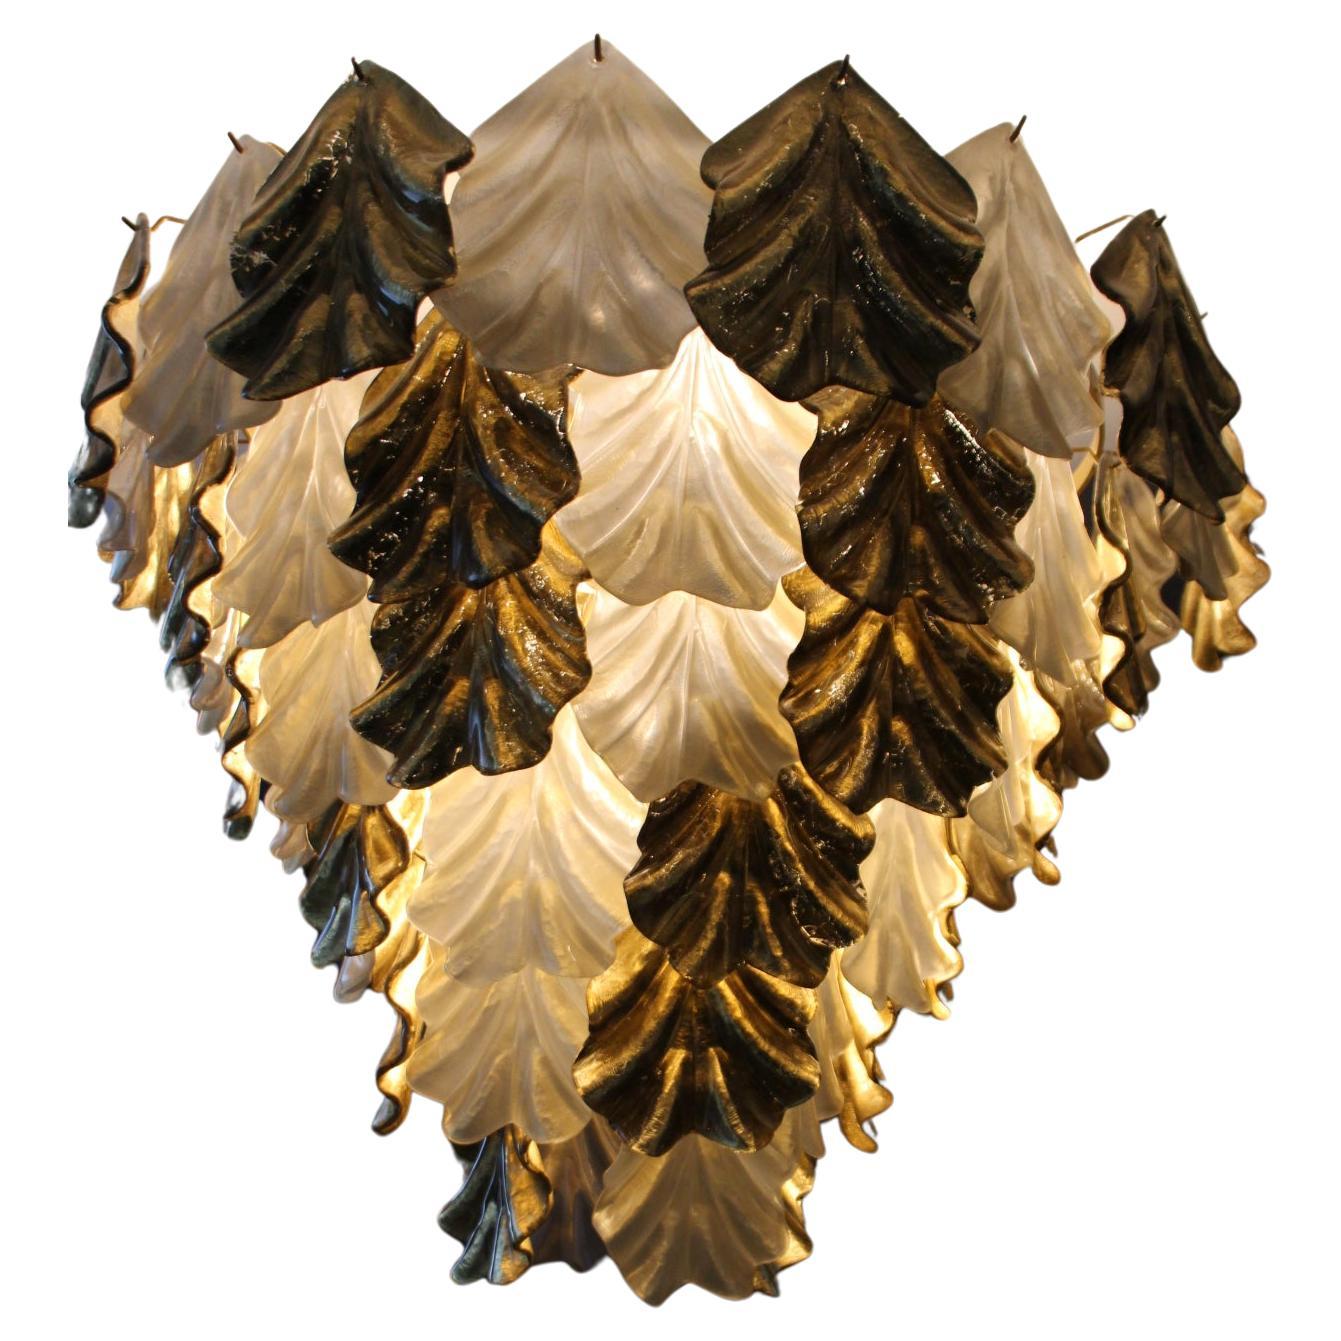 Iridescent Pearly and Golden Italian Murano Glass Chandelier In Barovier Style For Sale